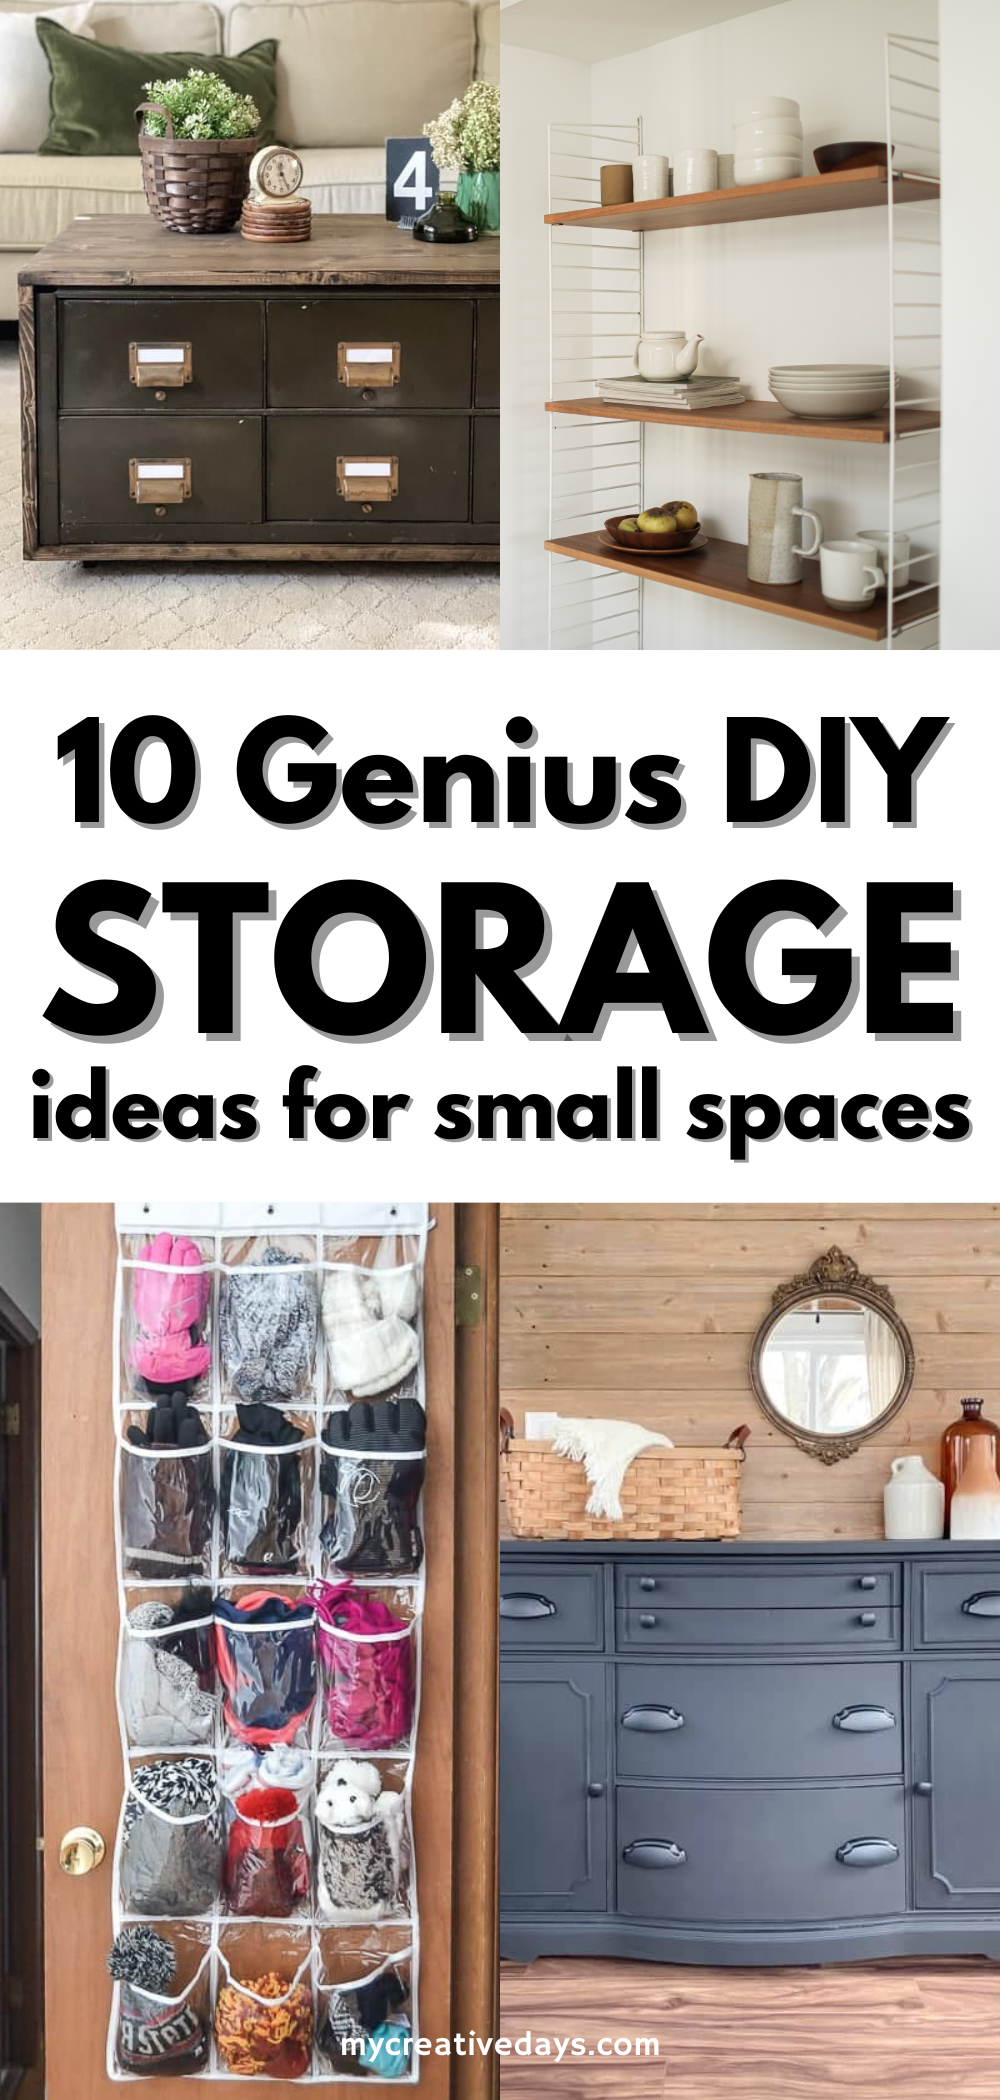 10 DIY Storage Ideas for Small Spaces